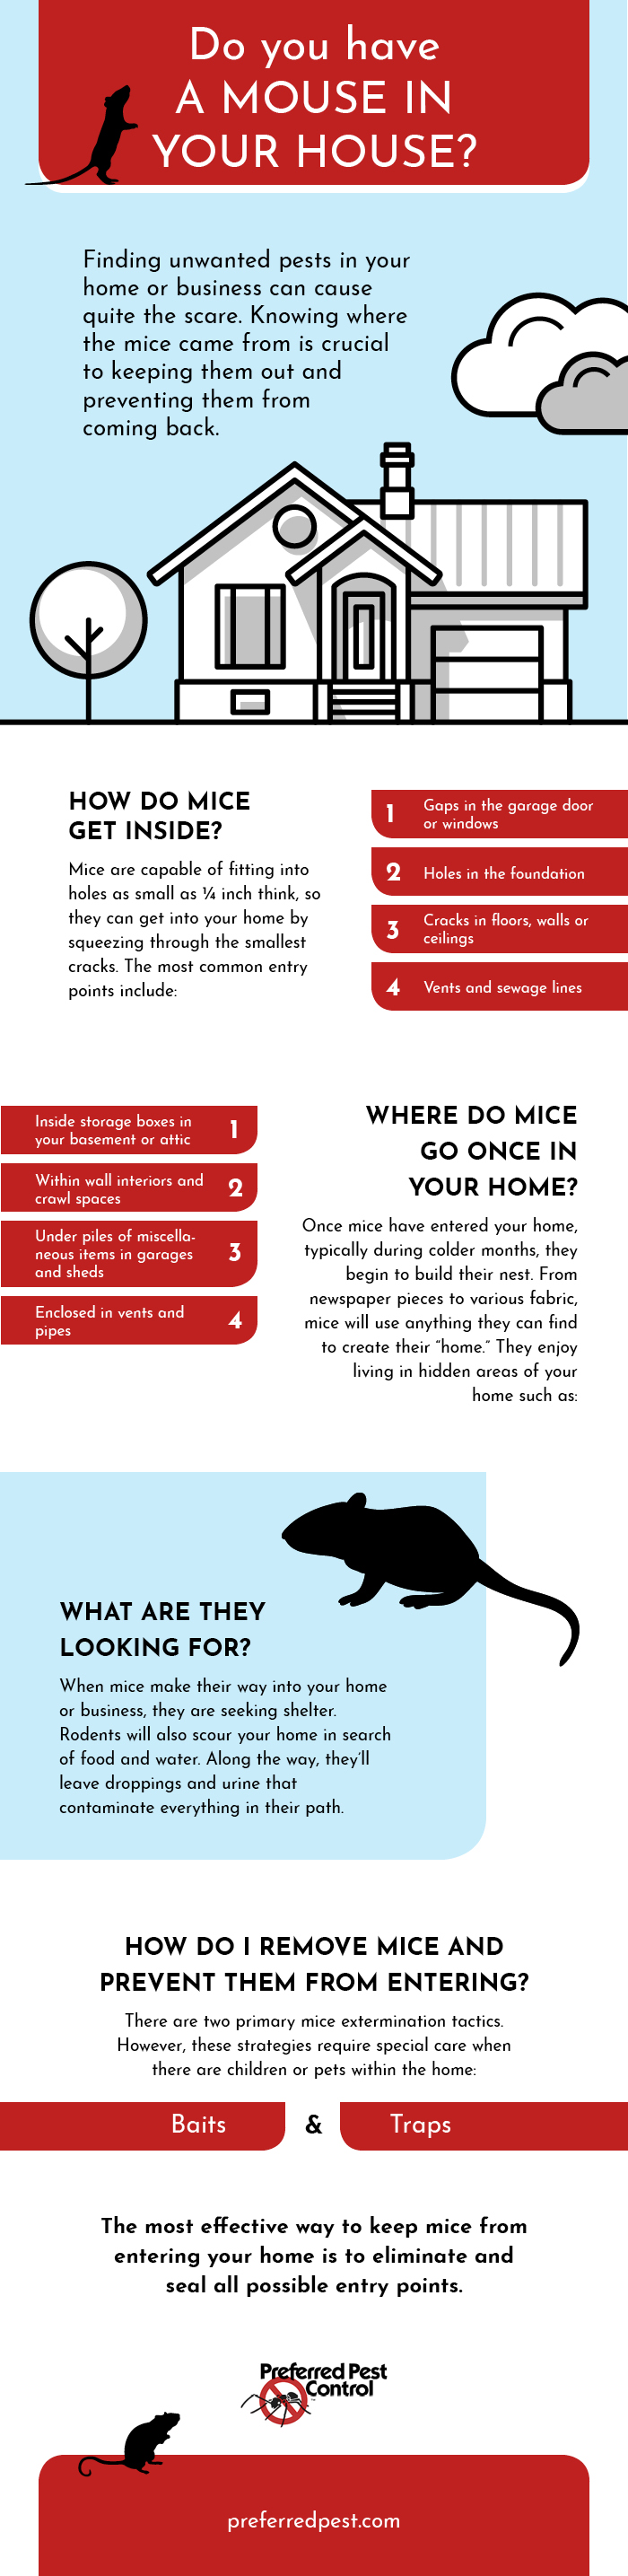 How To Keep Mice Away from Your House - Budget Brothers Termite & Pest  Control